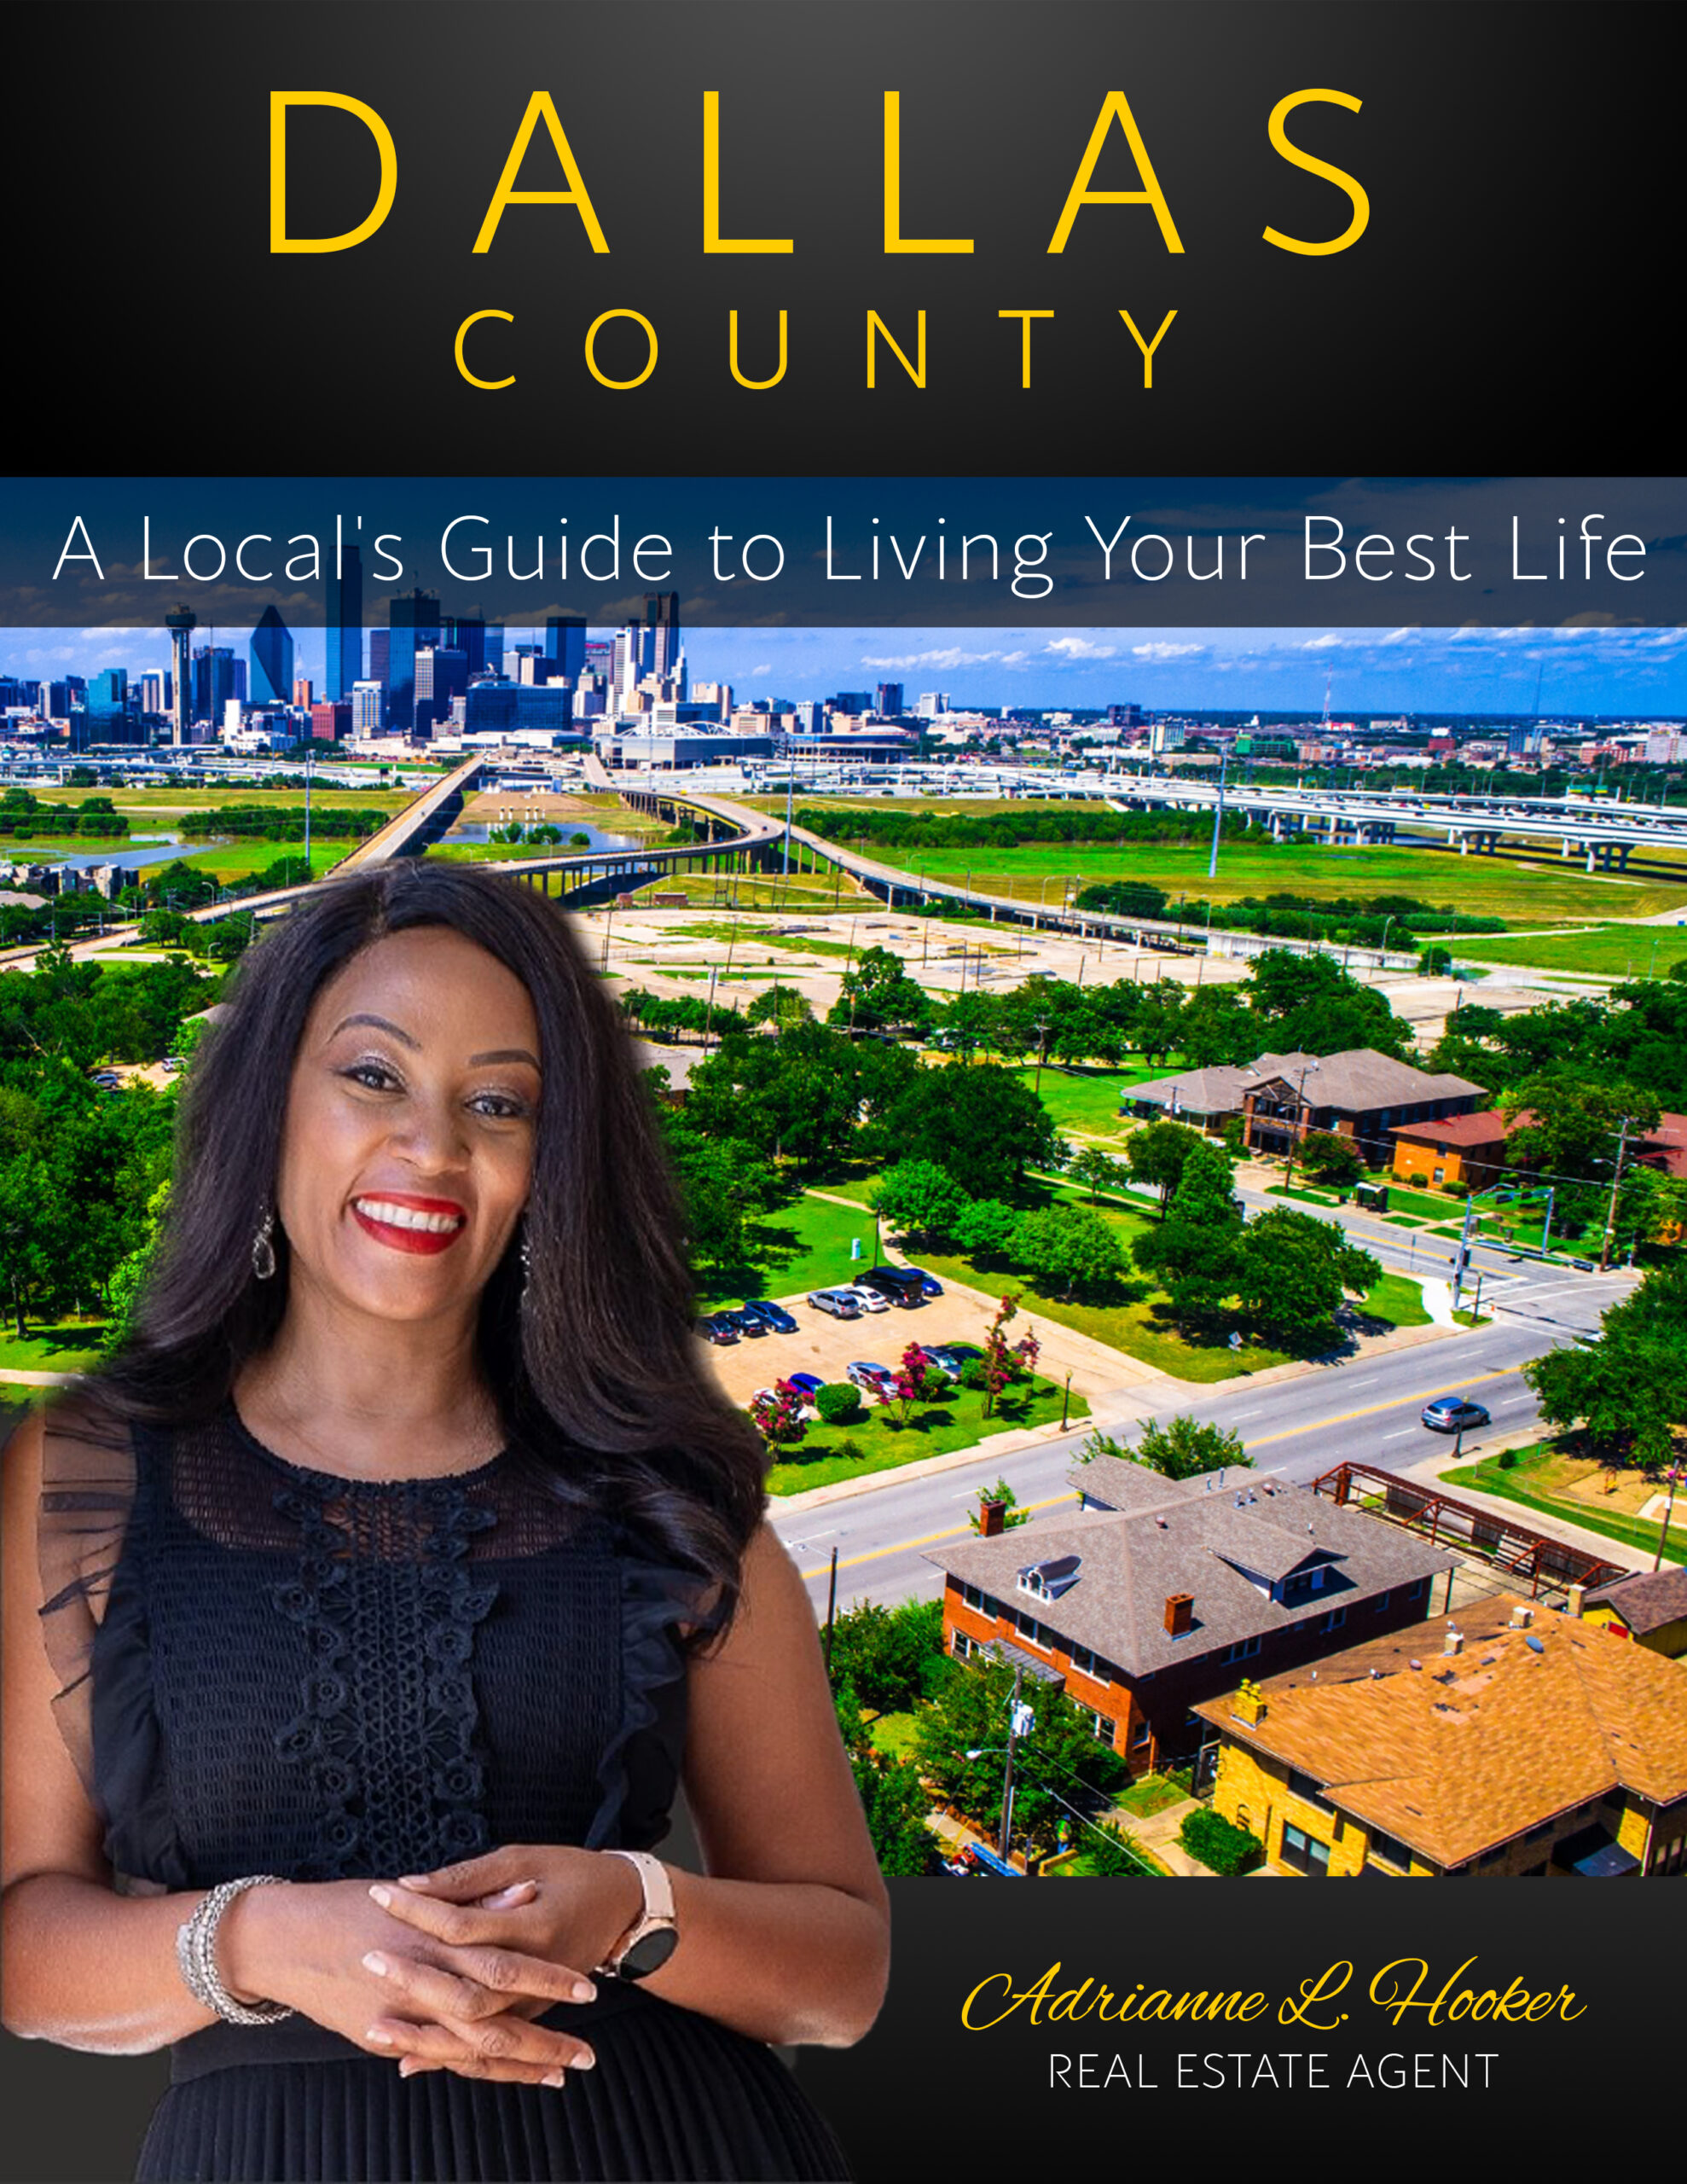 dallas-county-a-locals-guide-to-living-your-best-life